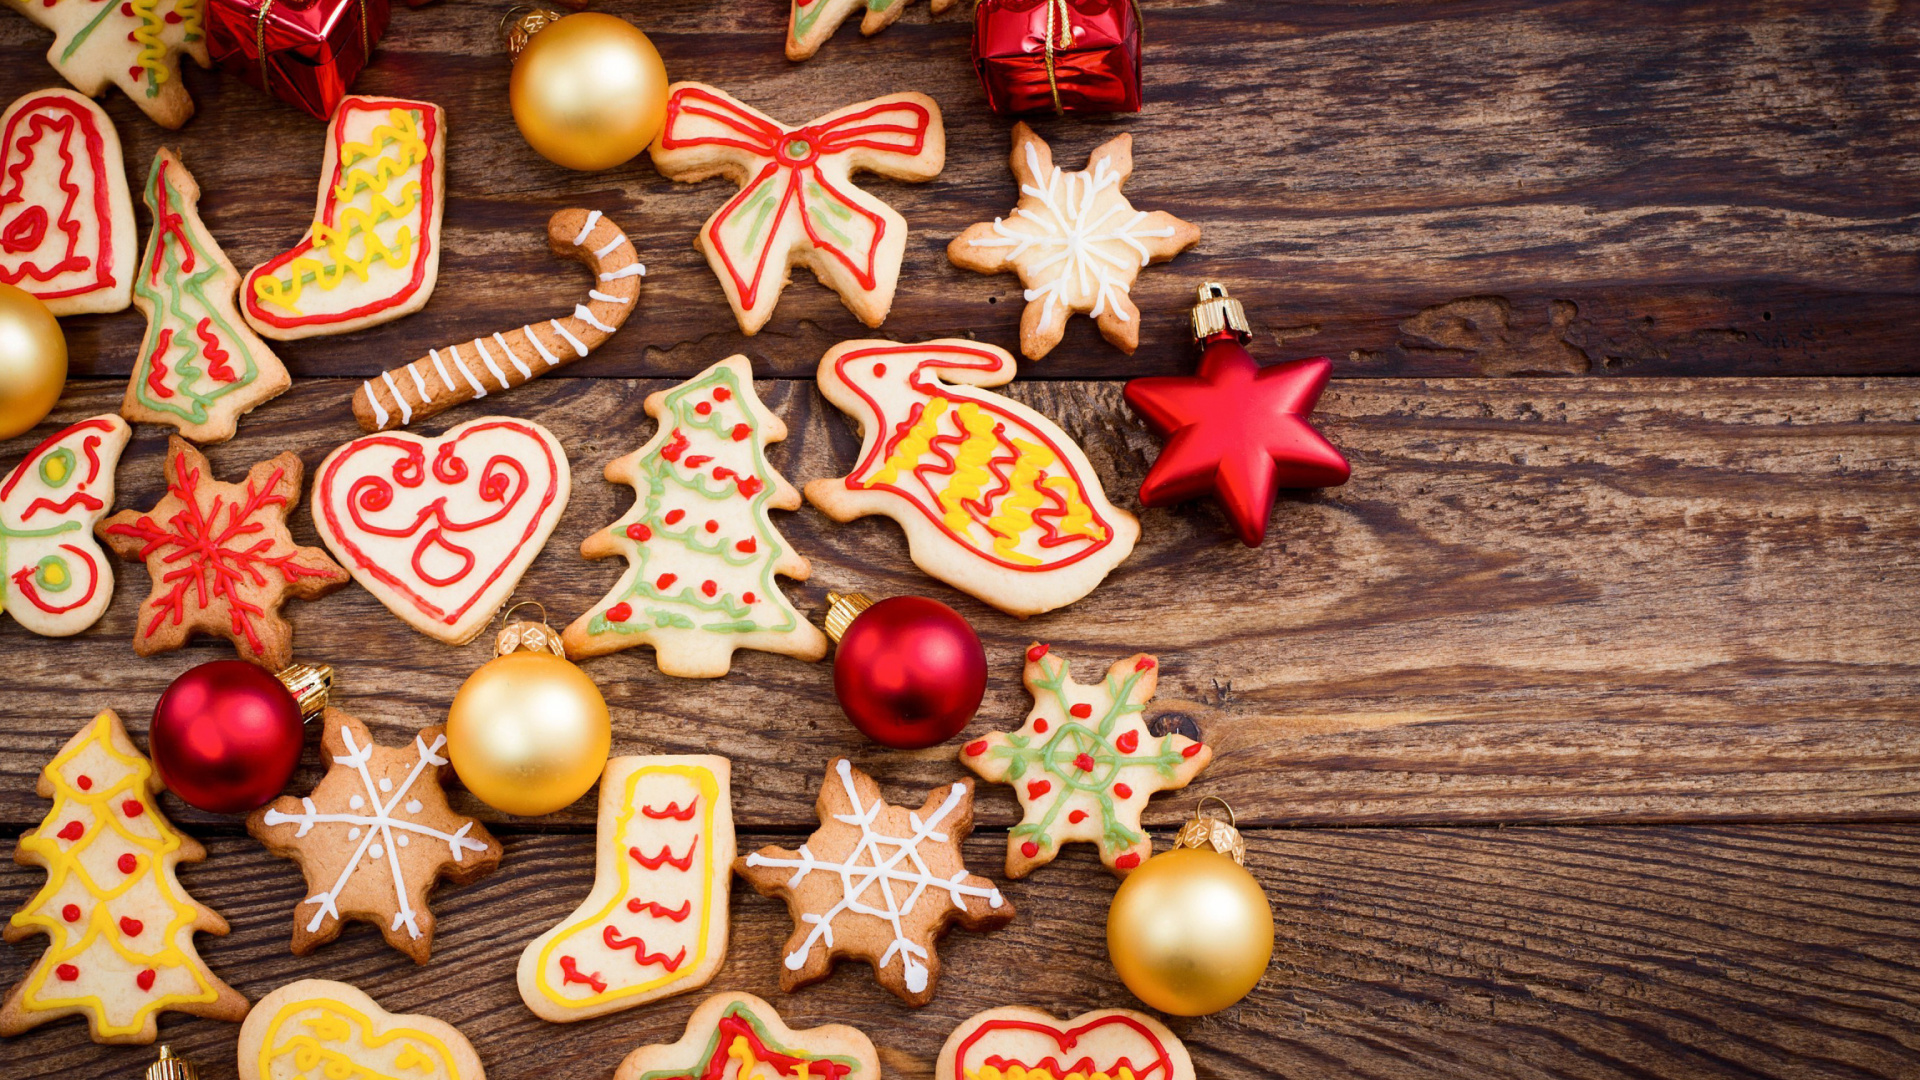 Das Christmas Decorations Cookies and Balls Wallpaper 1920x1080